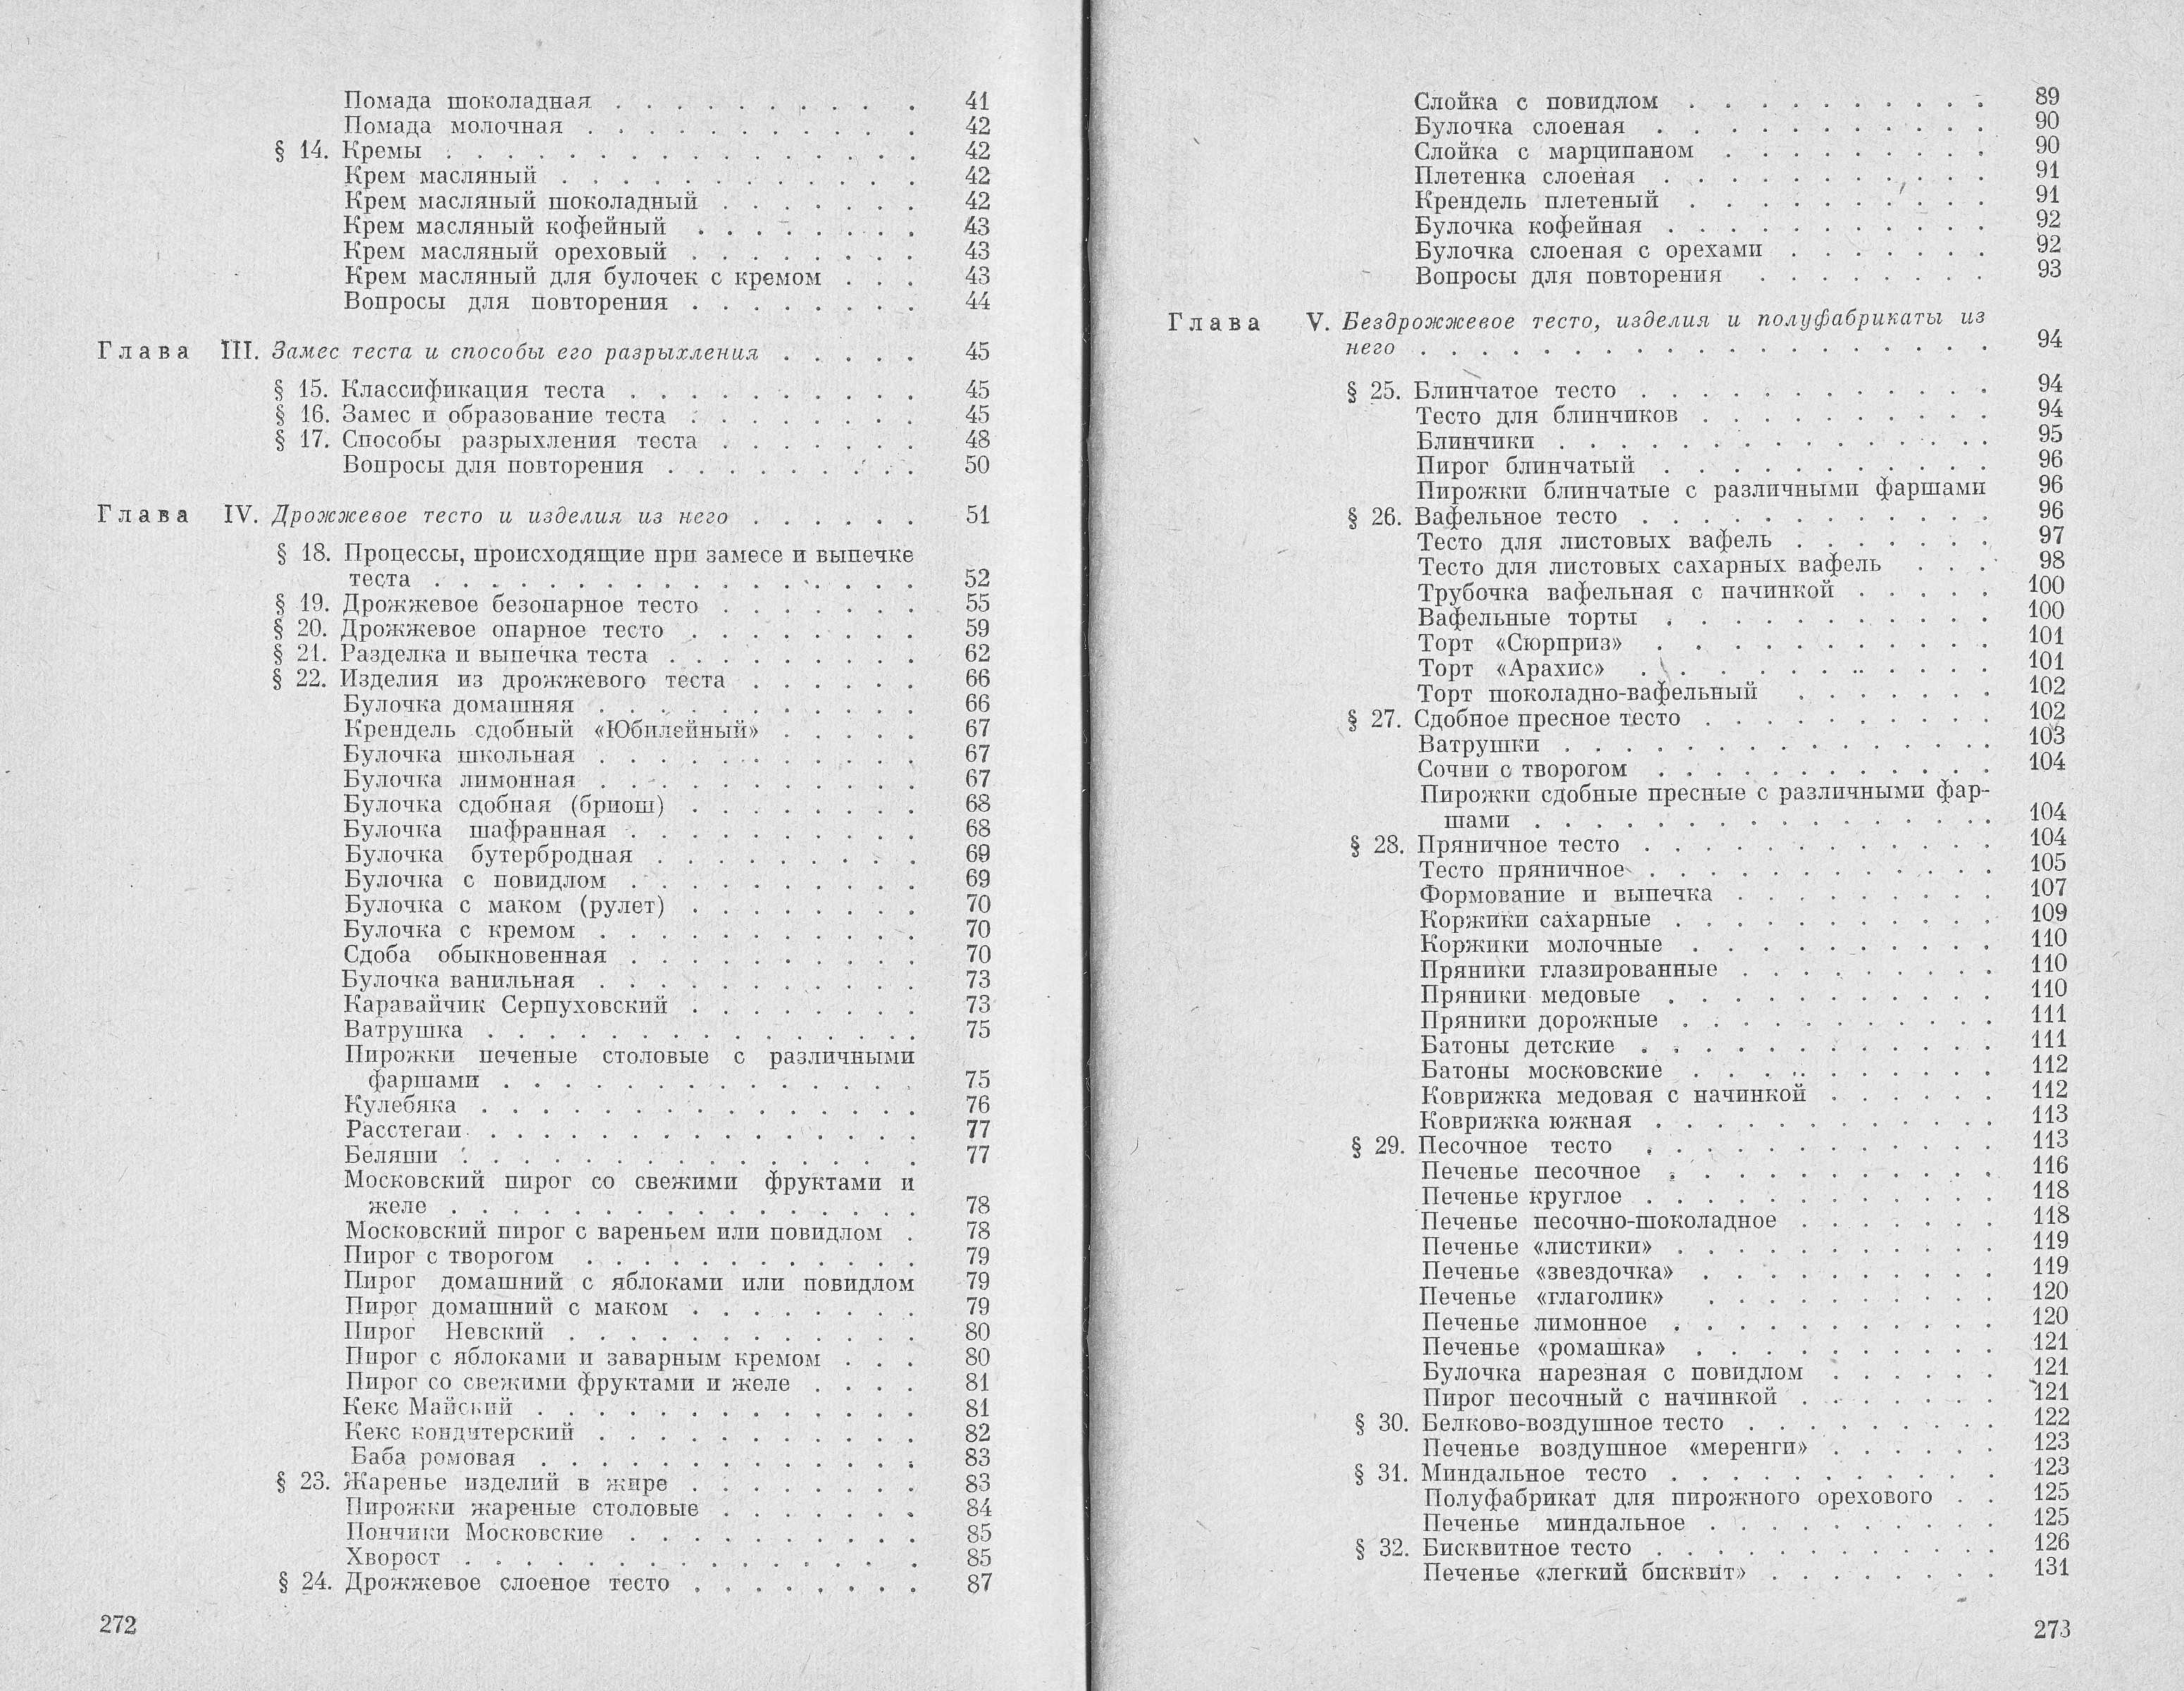 The technology for the preparation of flour confectionery products N.G. Buteykis, A.A. Zhukova 1976  pages 272‒273